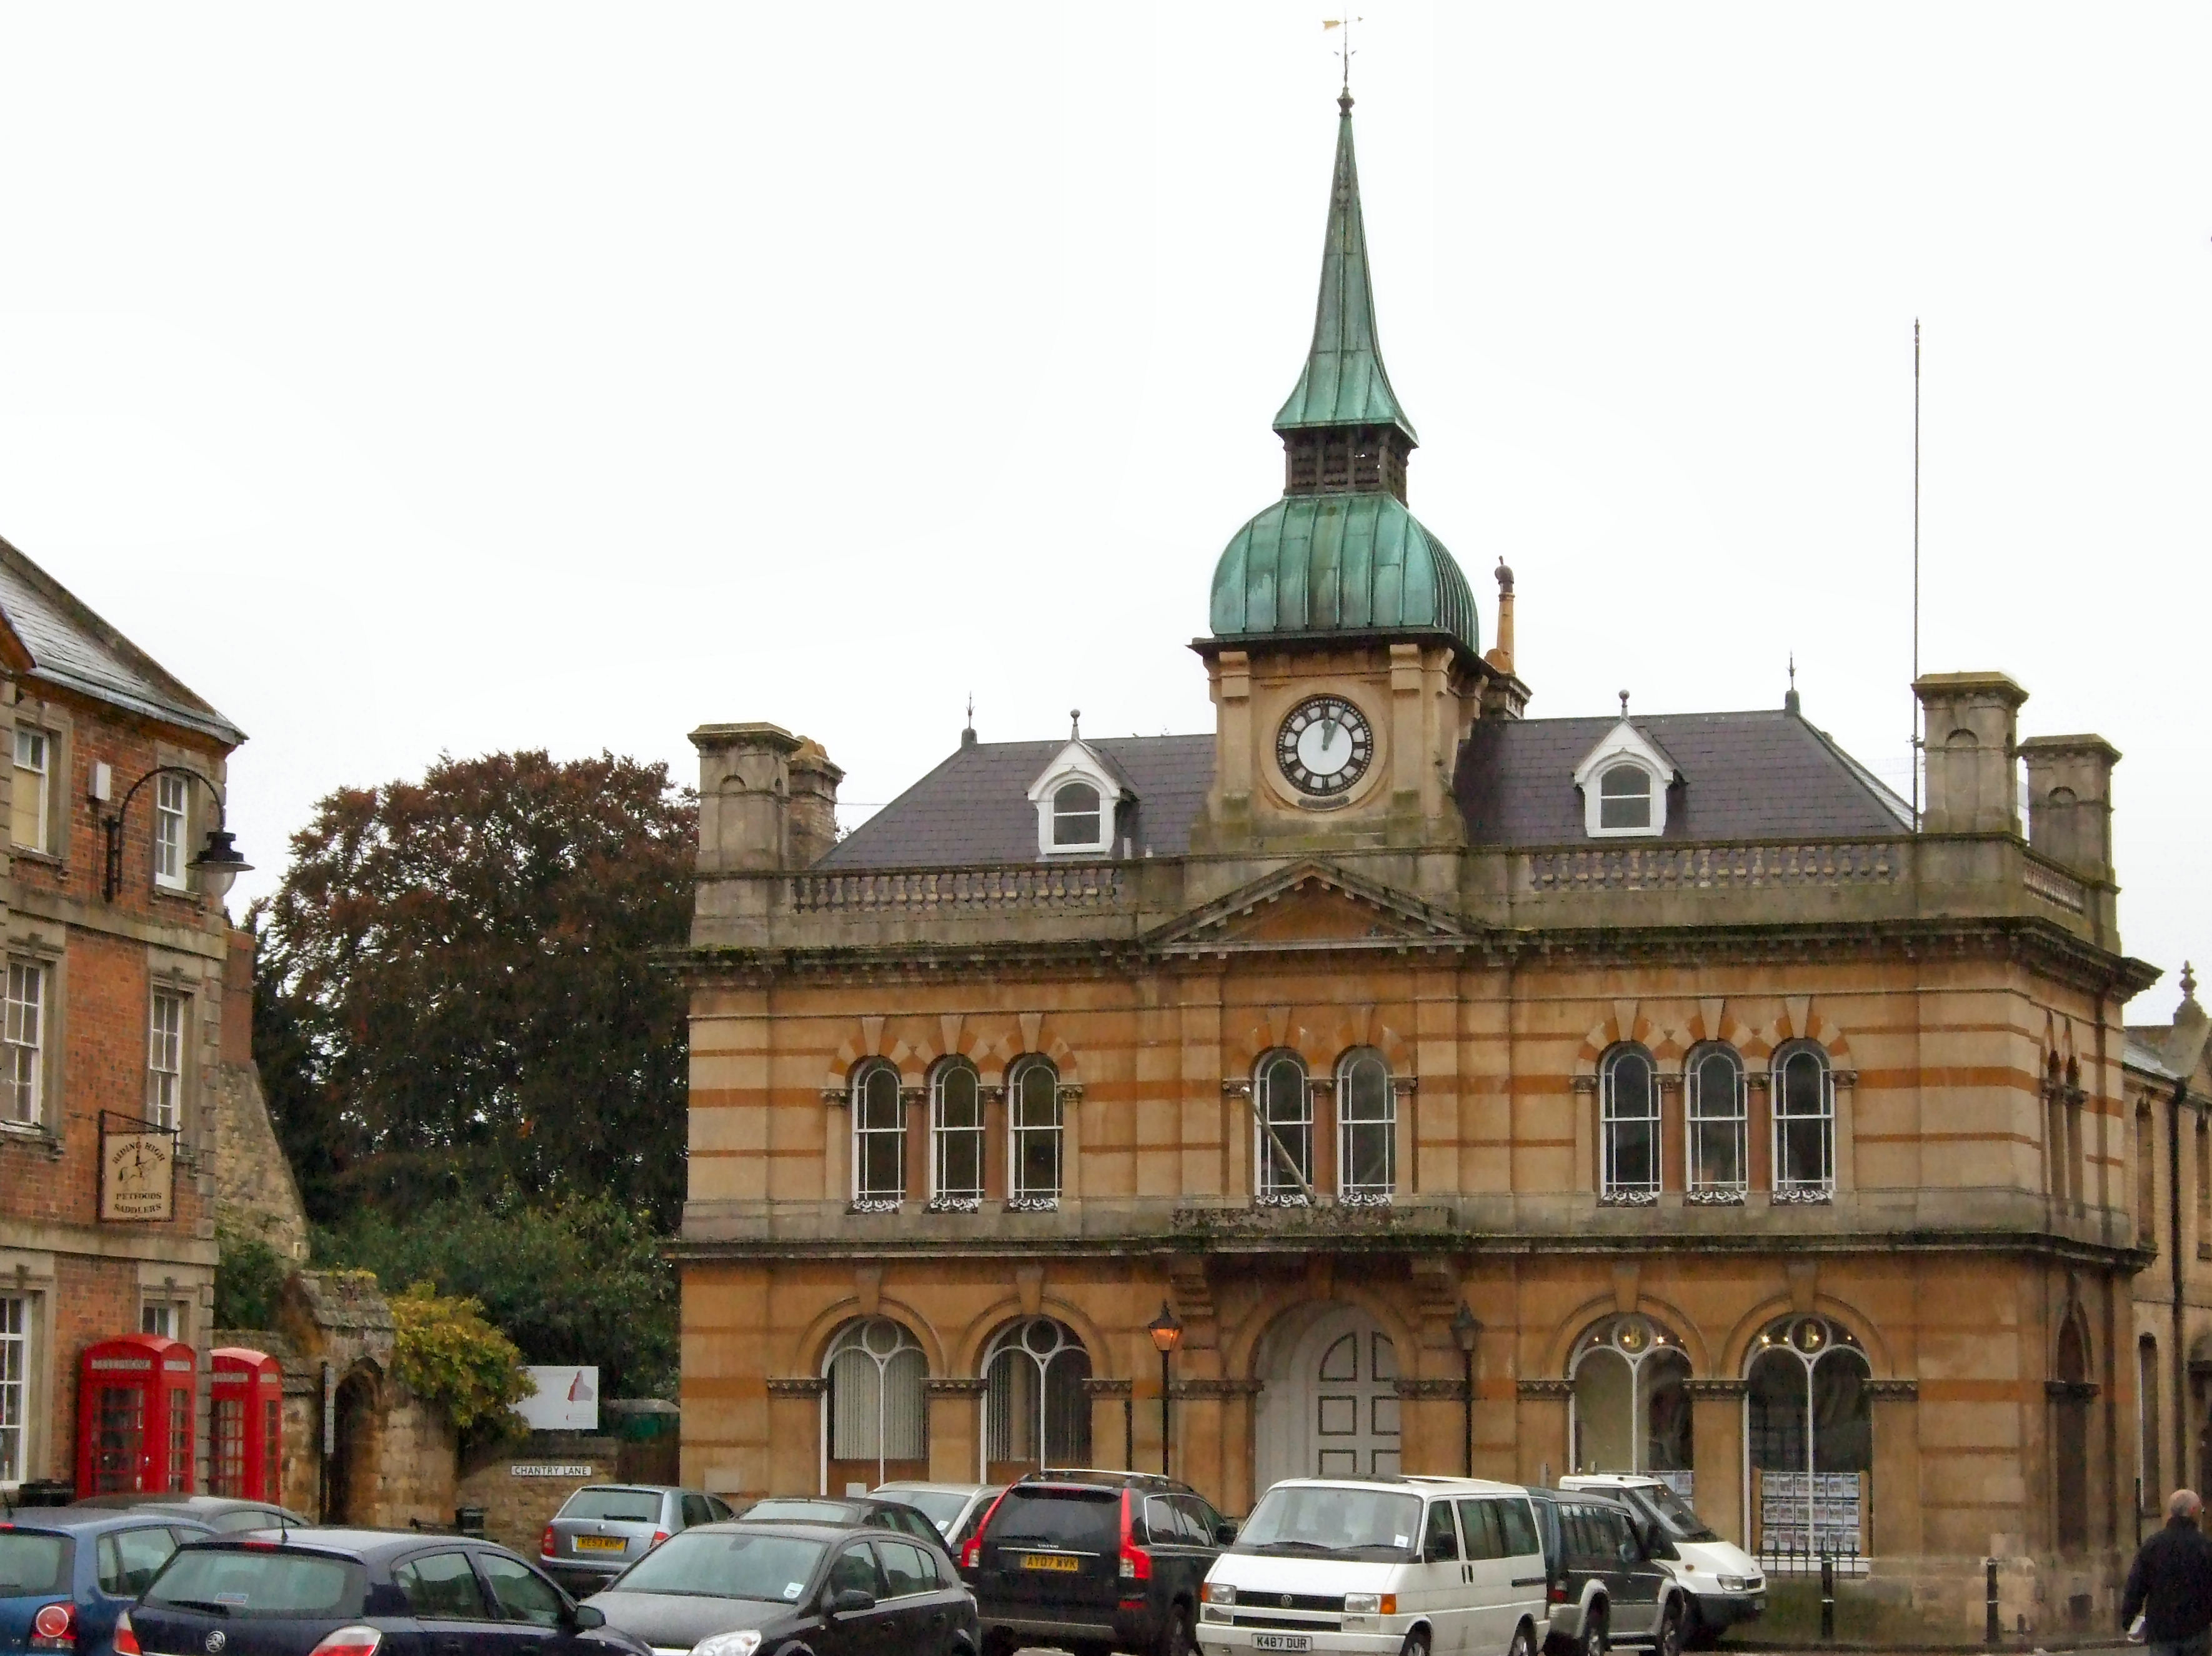 The Old Town Hall, Towcester, Northamptonshire